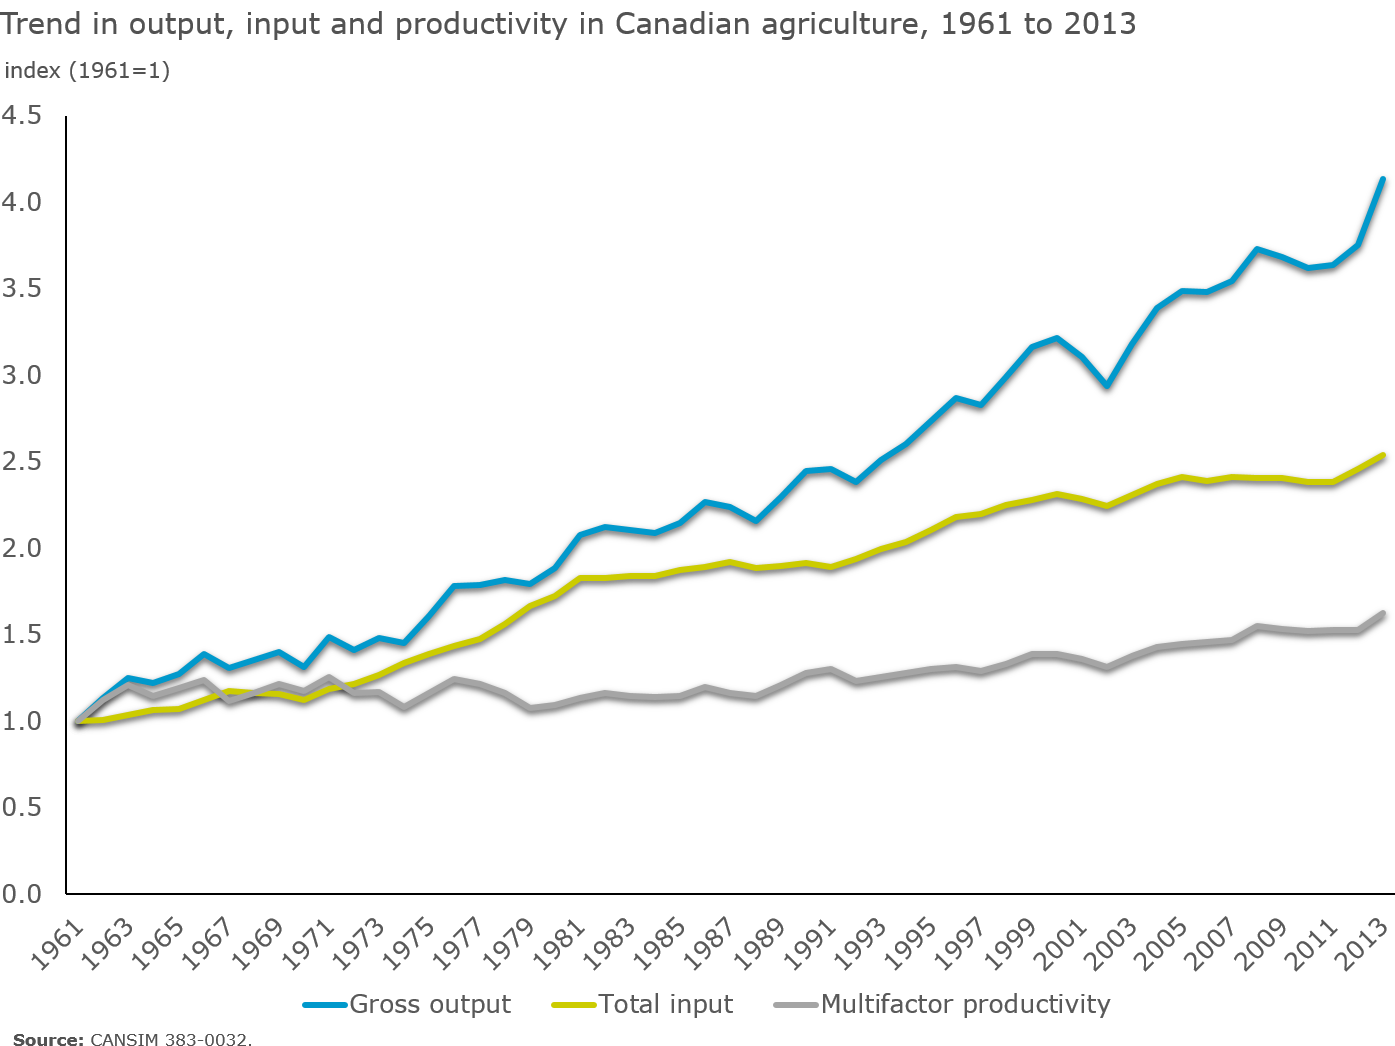 Chart 5 - Trend in output, input and productivity in Canadian agriculture, 1961 to 2013